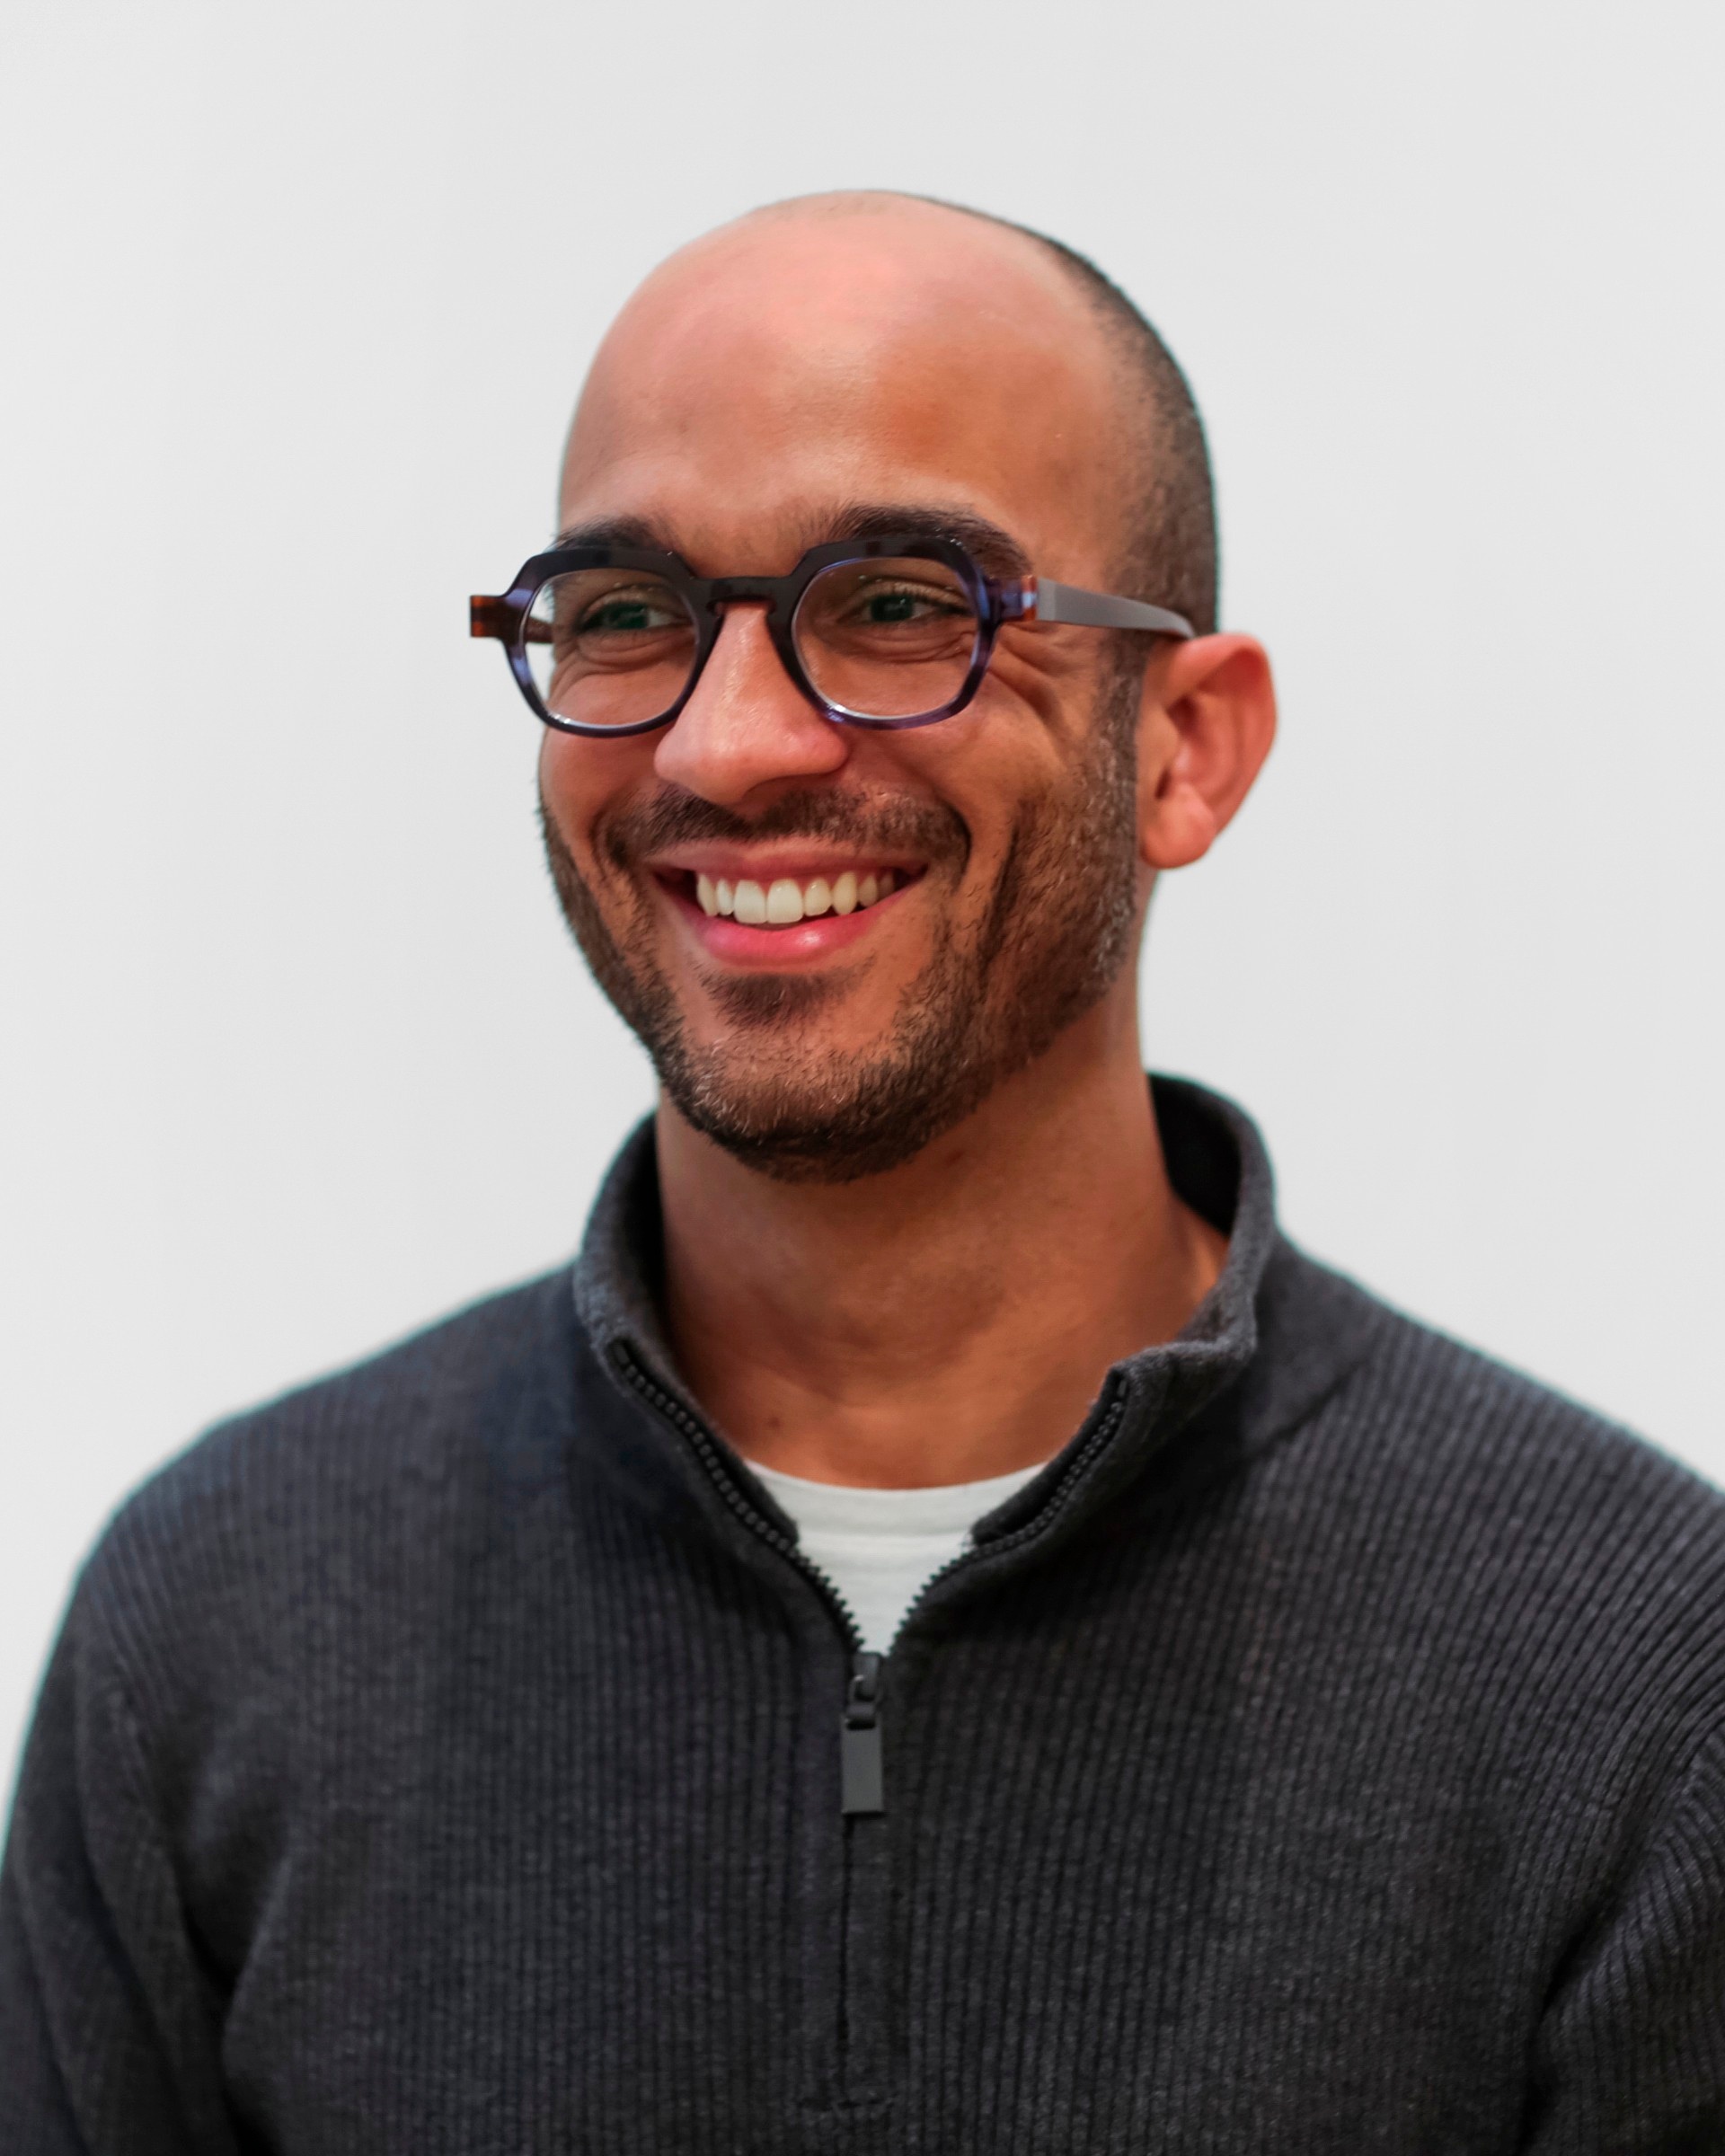 A photo of the artist Samuel Levi Jones against a white background. Jones is smiling, wearing glasses and a gray half-zip sweater.